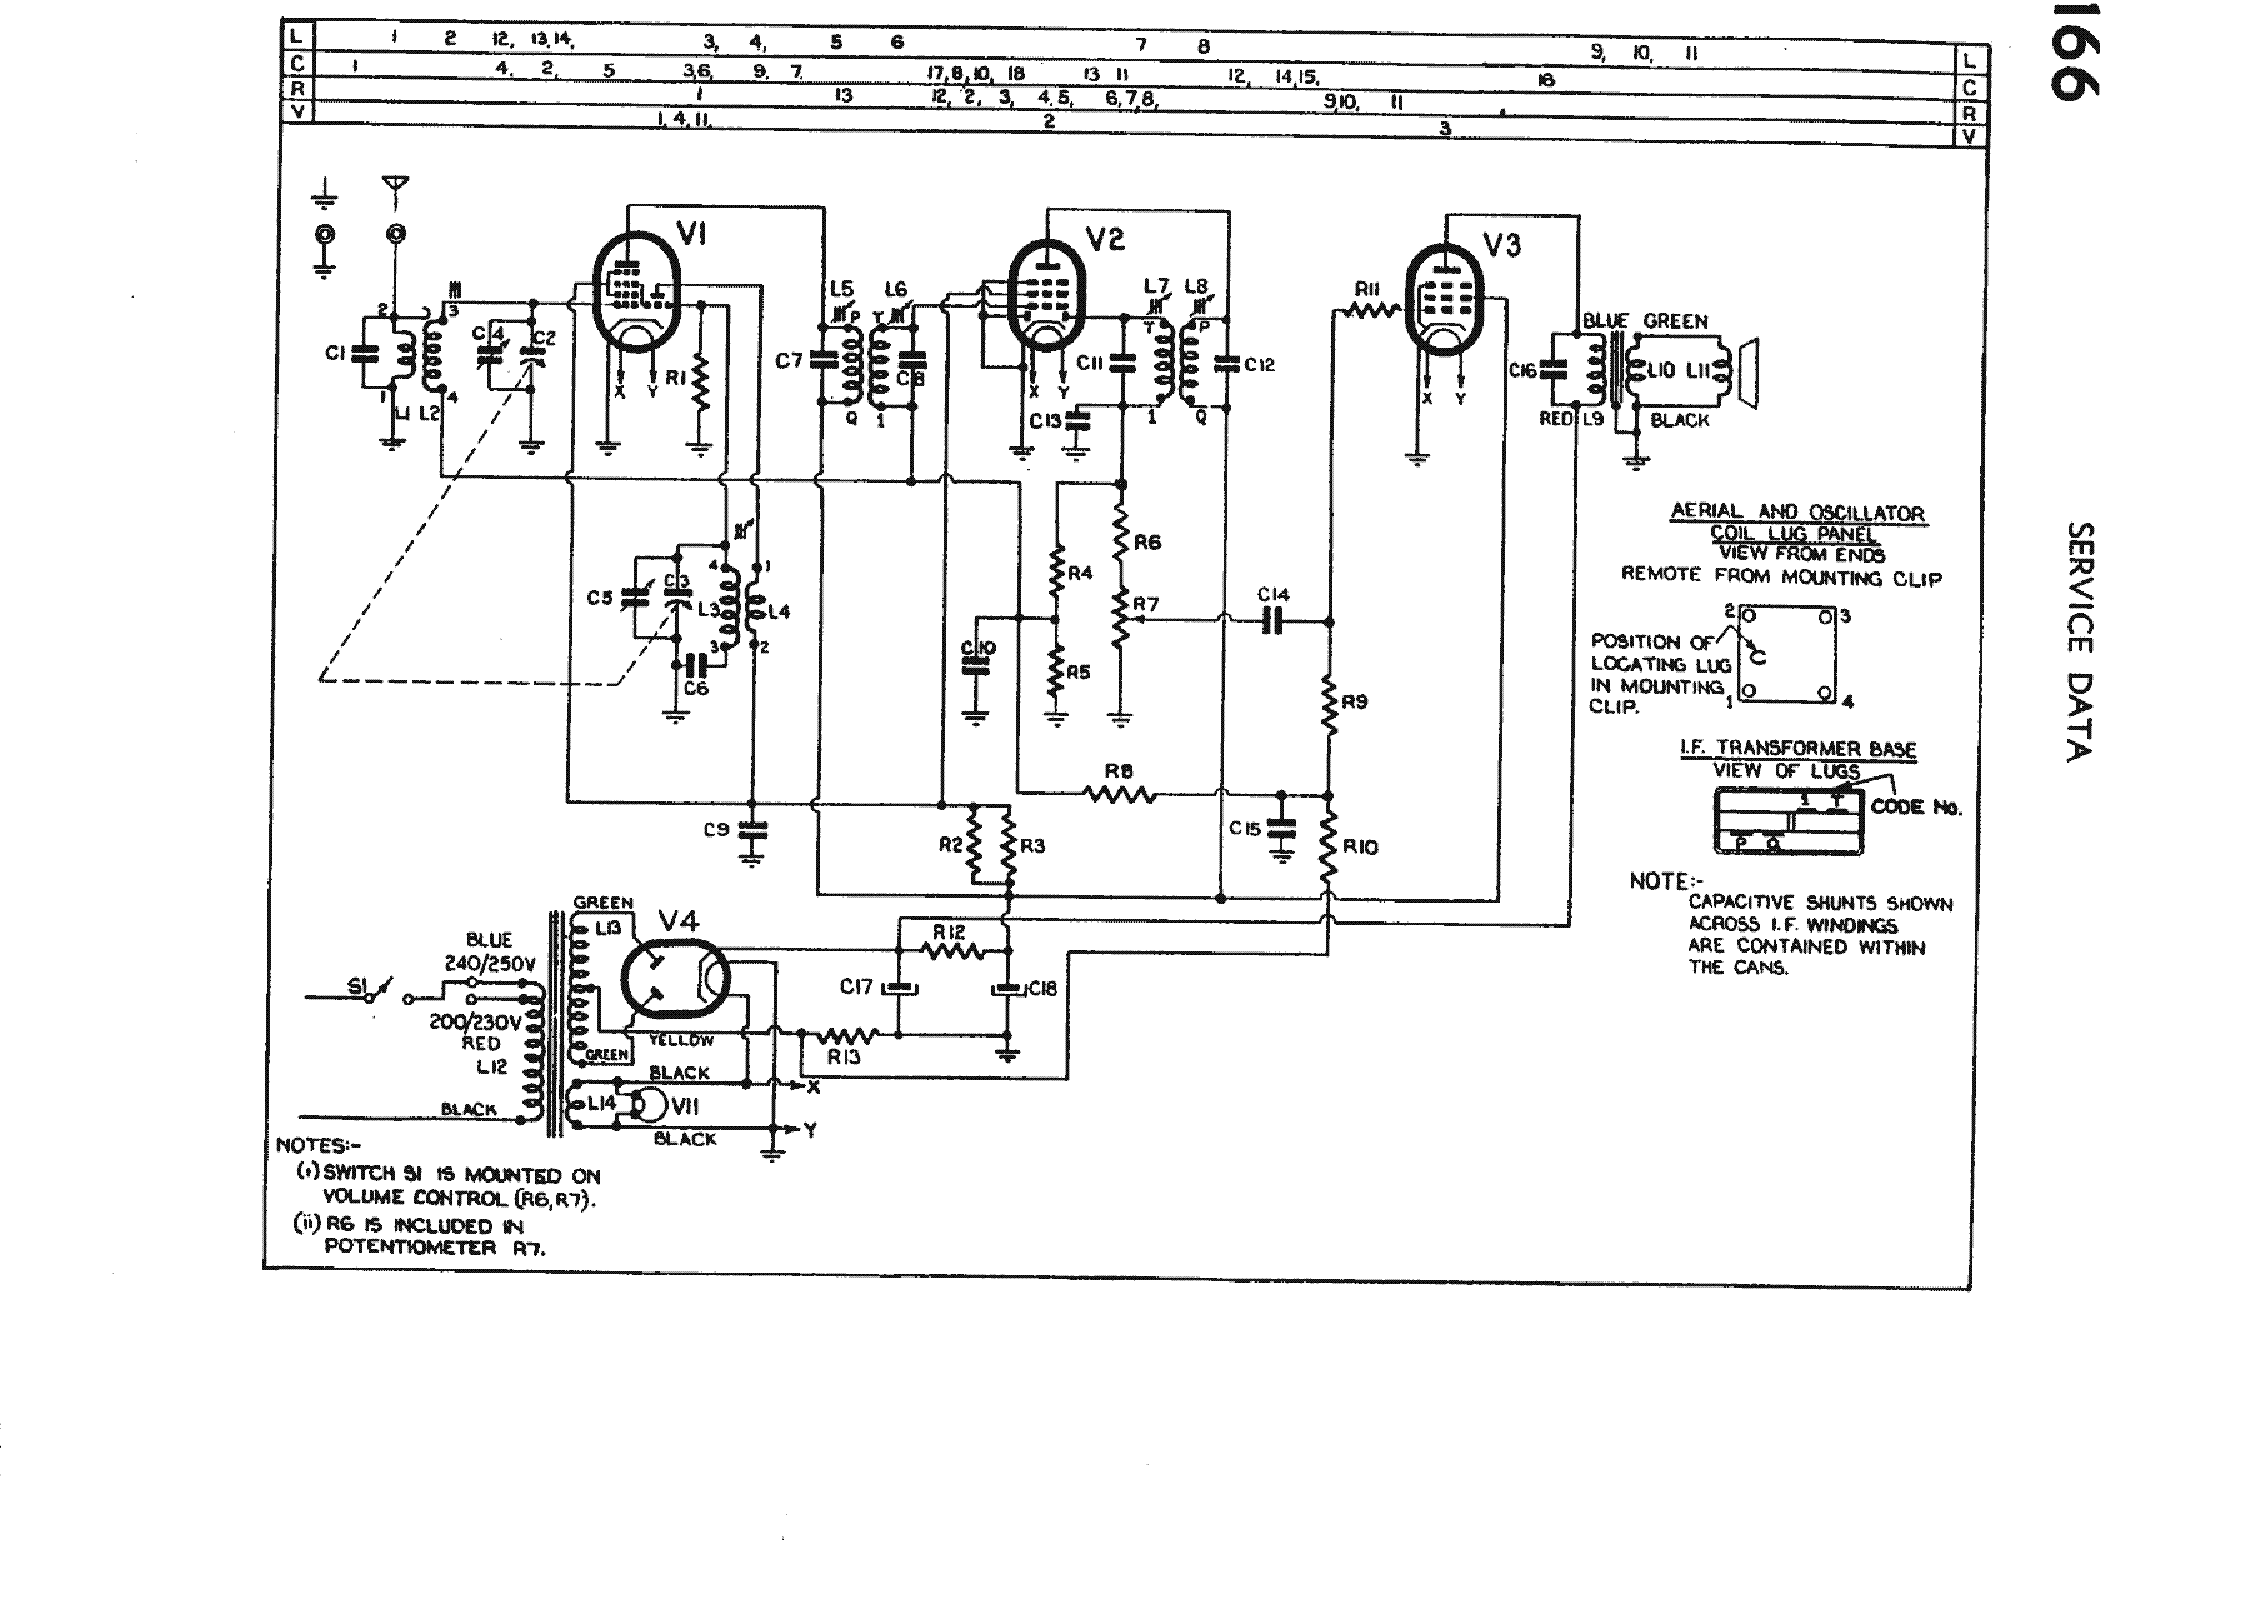 PHILIPS 166 service manual (1st page)